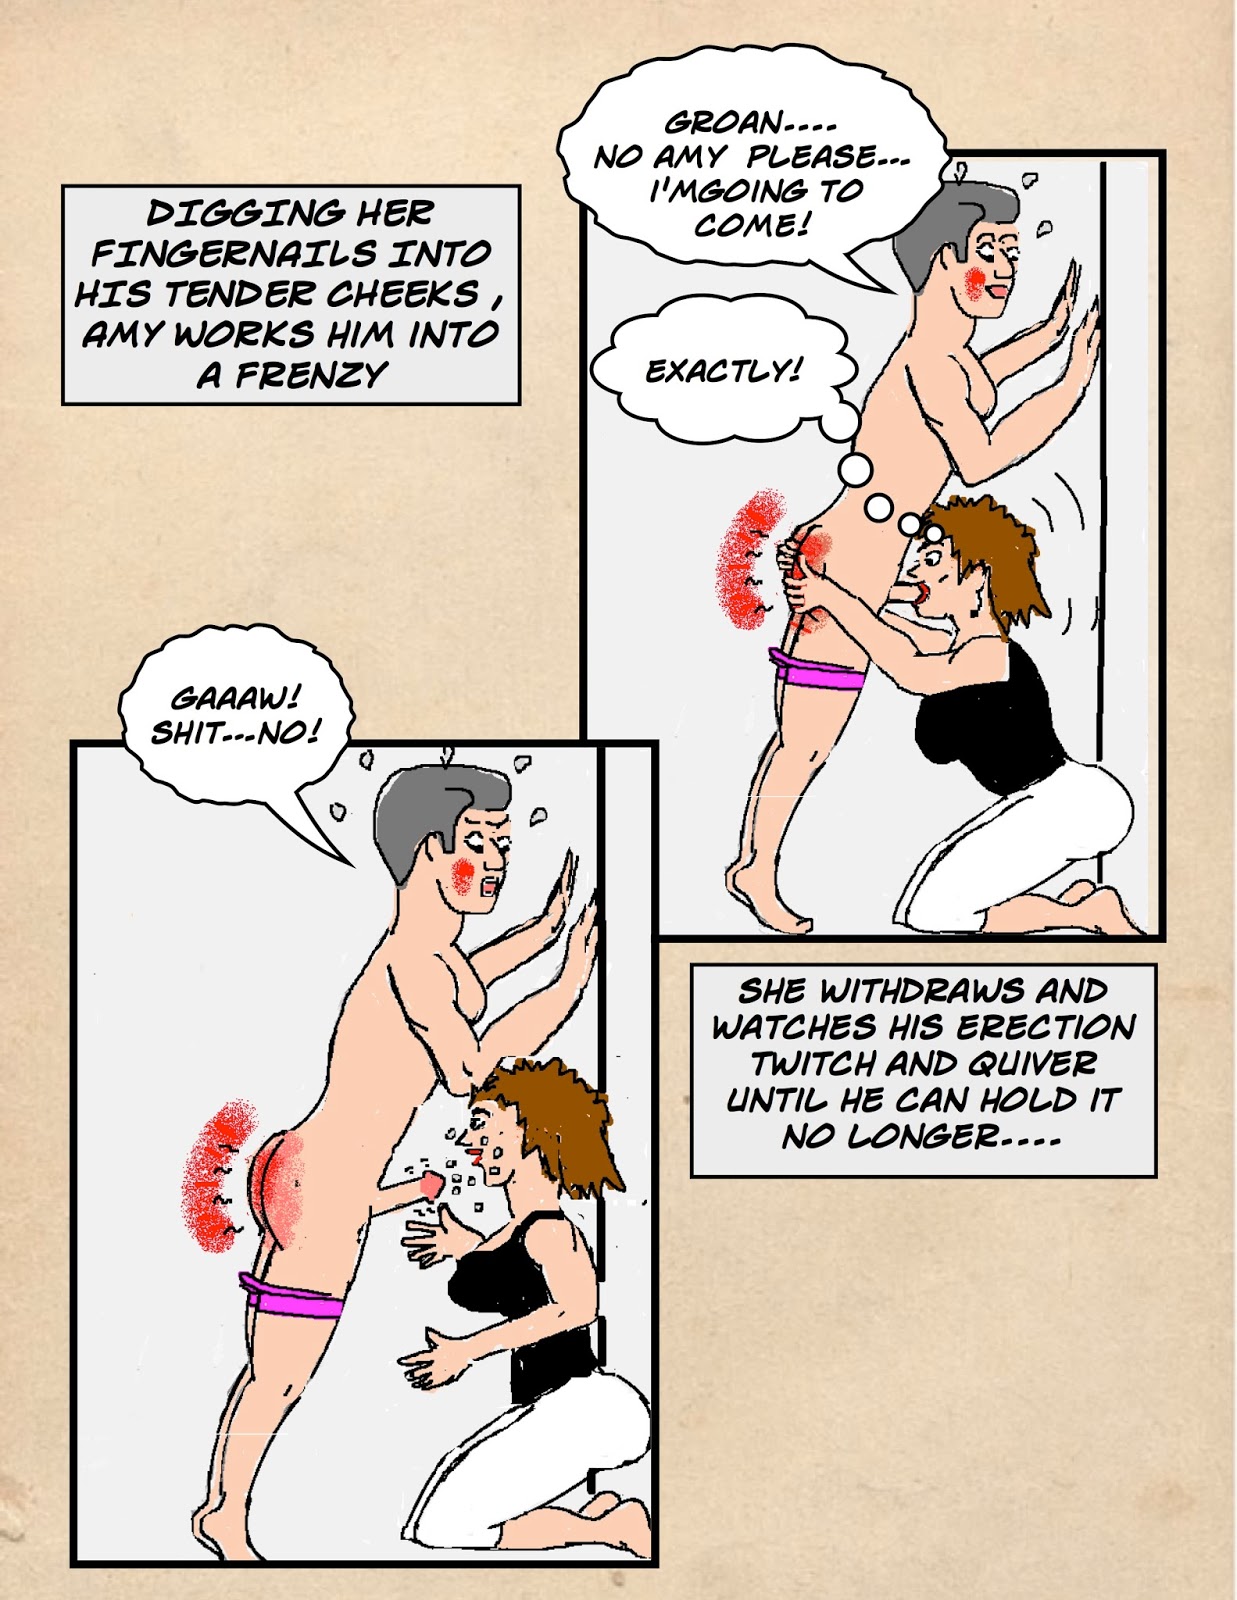 Glenmore's Adult Spanking Stories & Art: Against the Wall ...